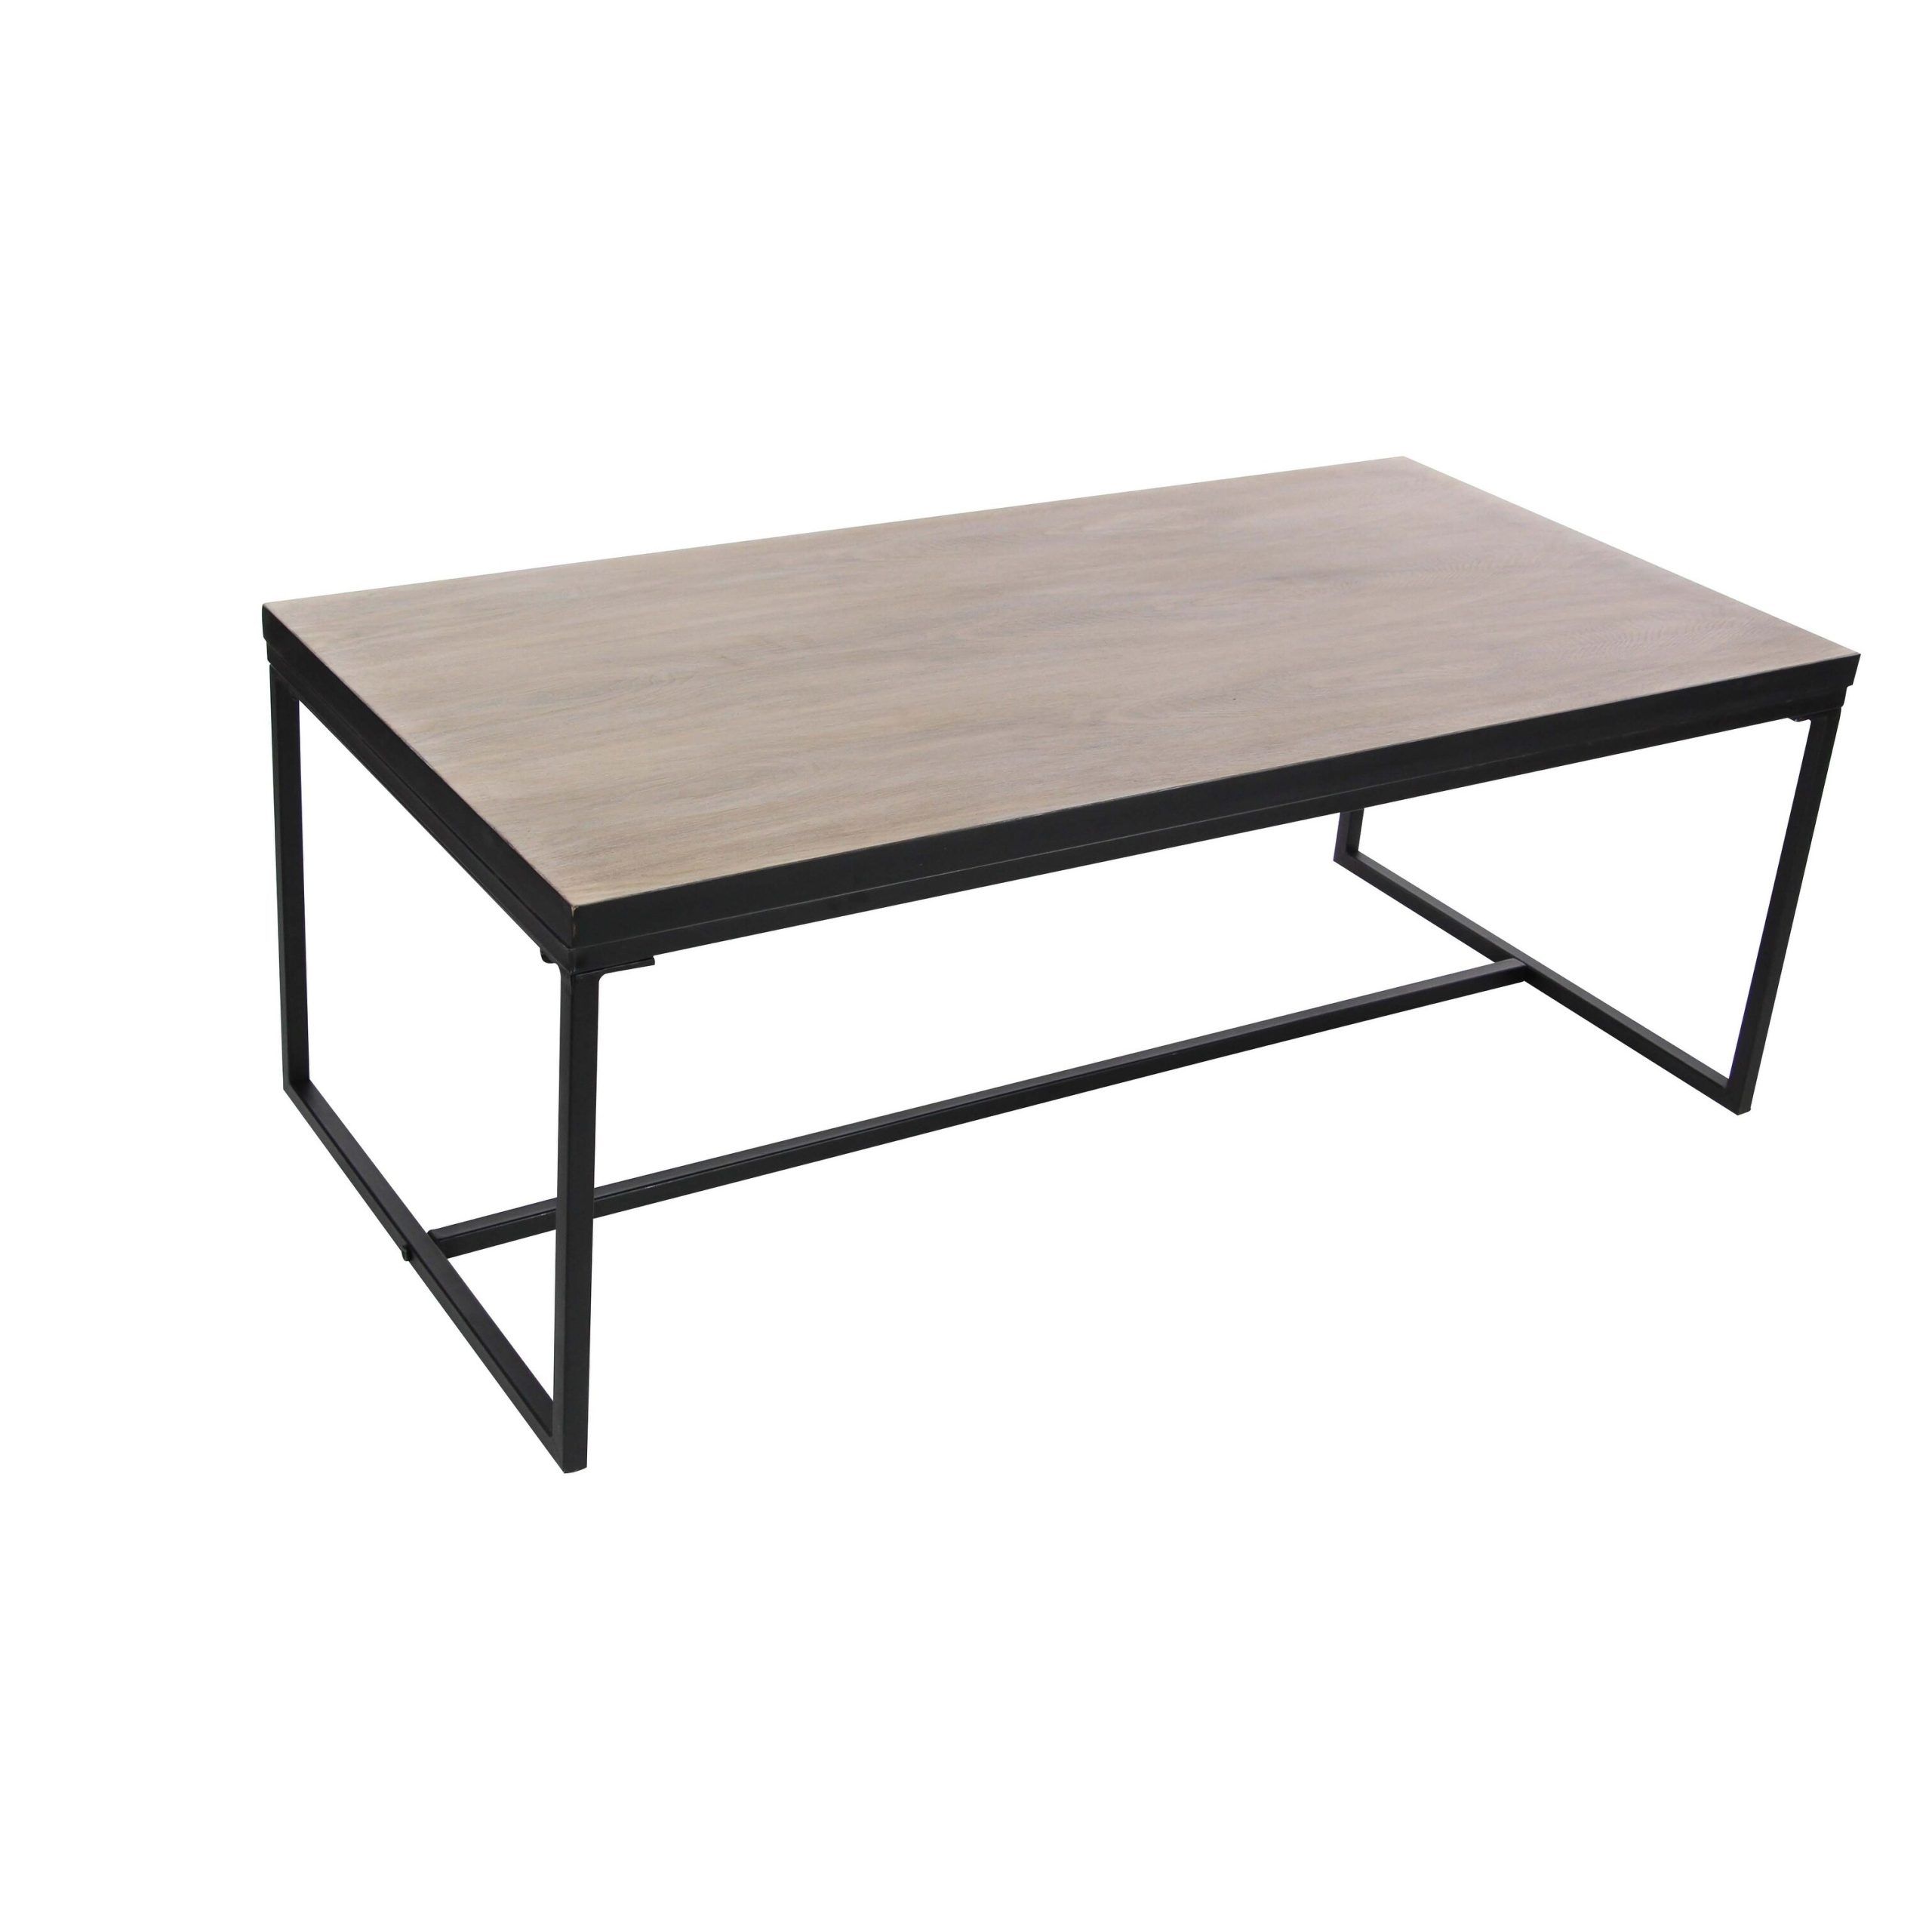 Modern 18 X 47 Inch Iron And Pine Wood Coffee Tablestudio 350 – Bed  Bath & Beyond – 17240580 Inside Studio 350 Black Metal Coffee Tables (View 6 of 15)